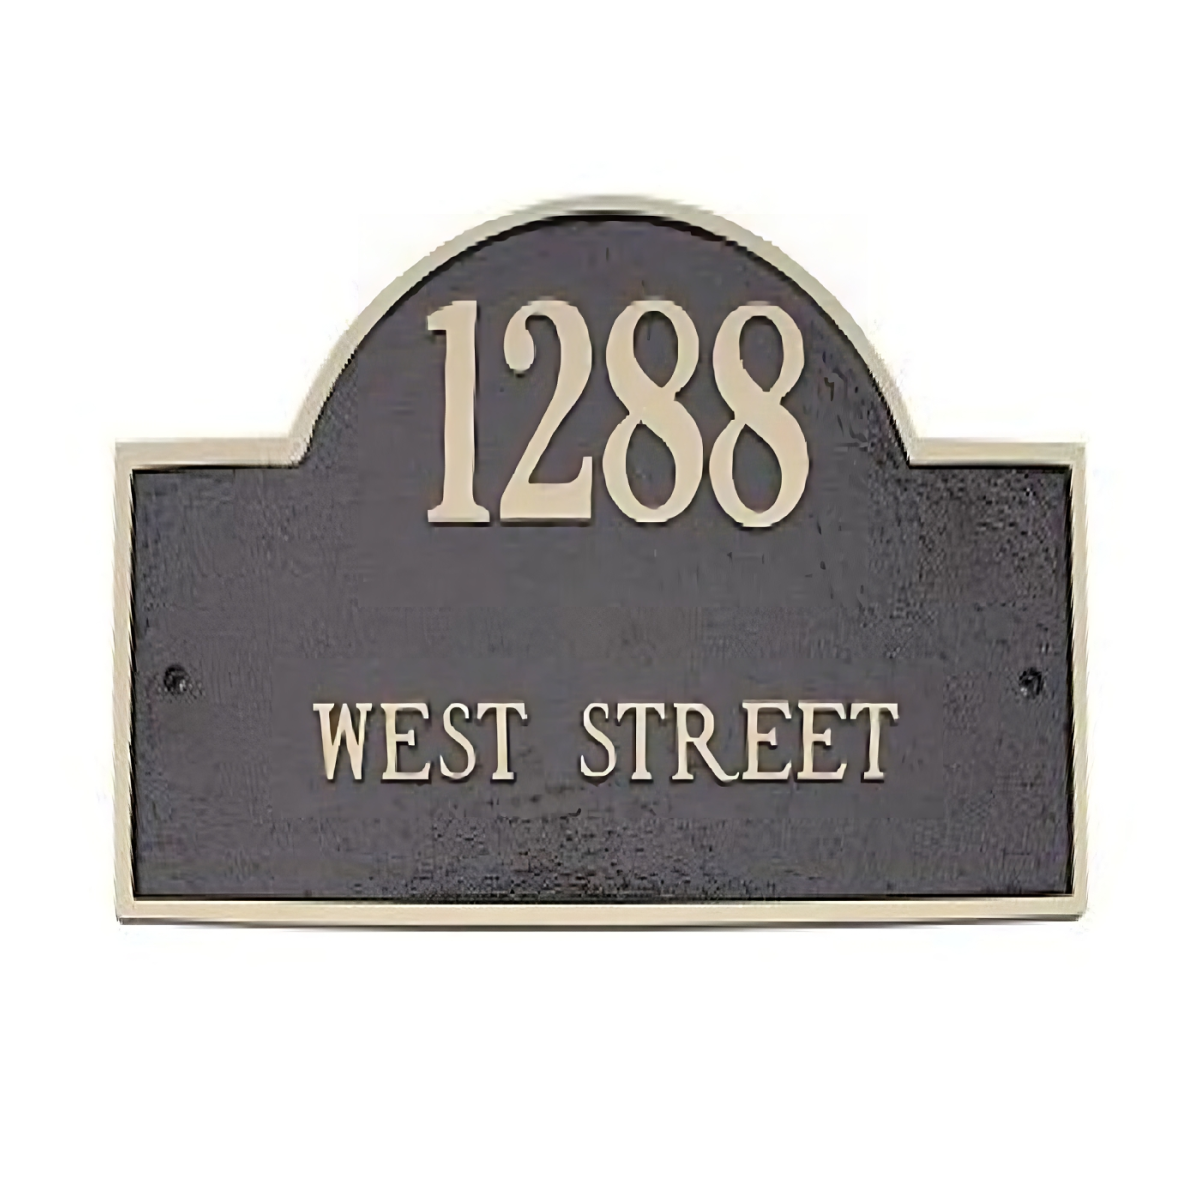 Majestic Solid Brass Arch Marker Address Plaques Product Image